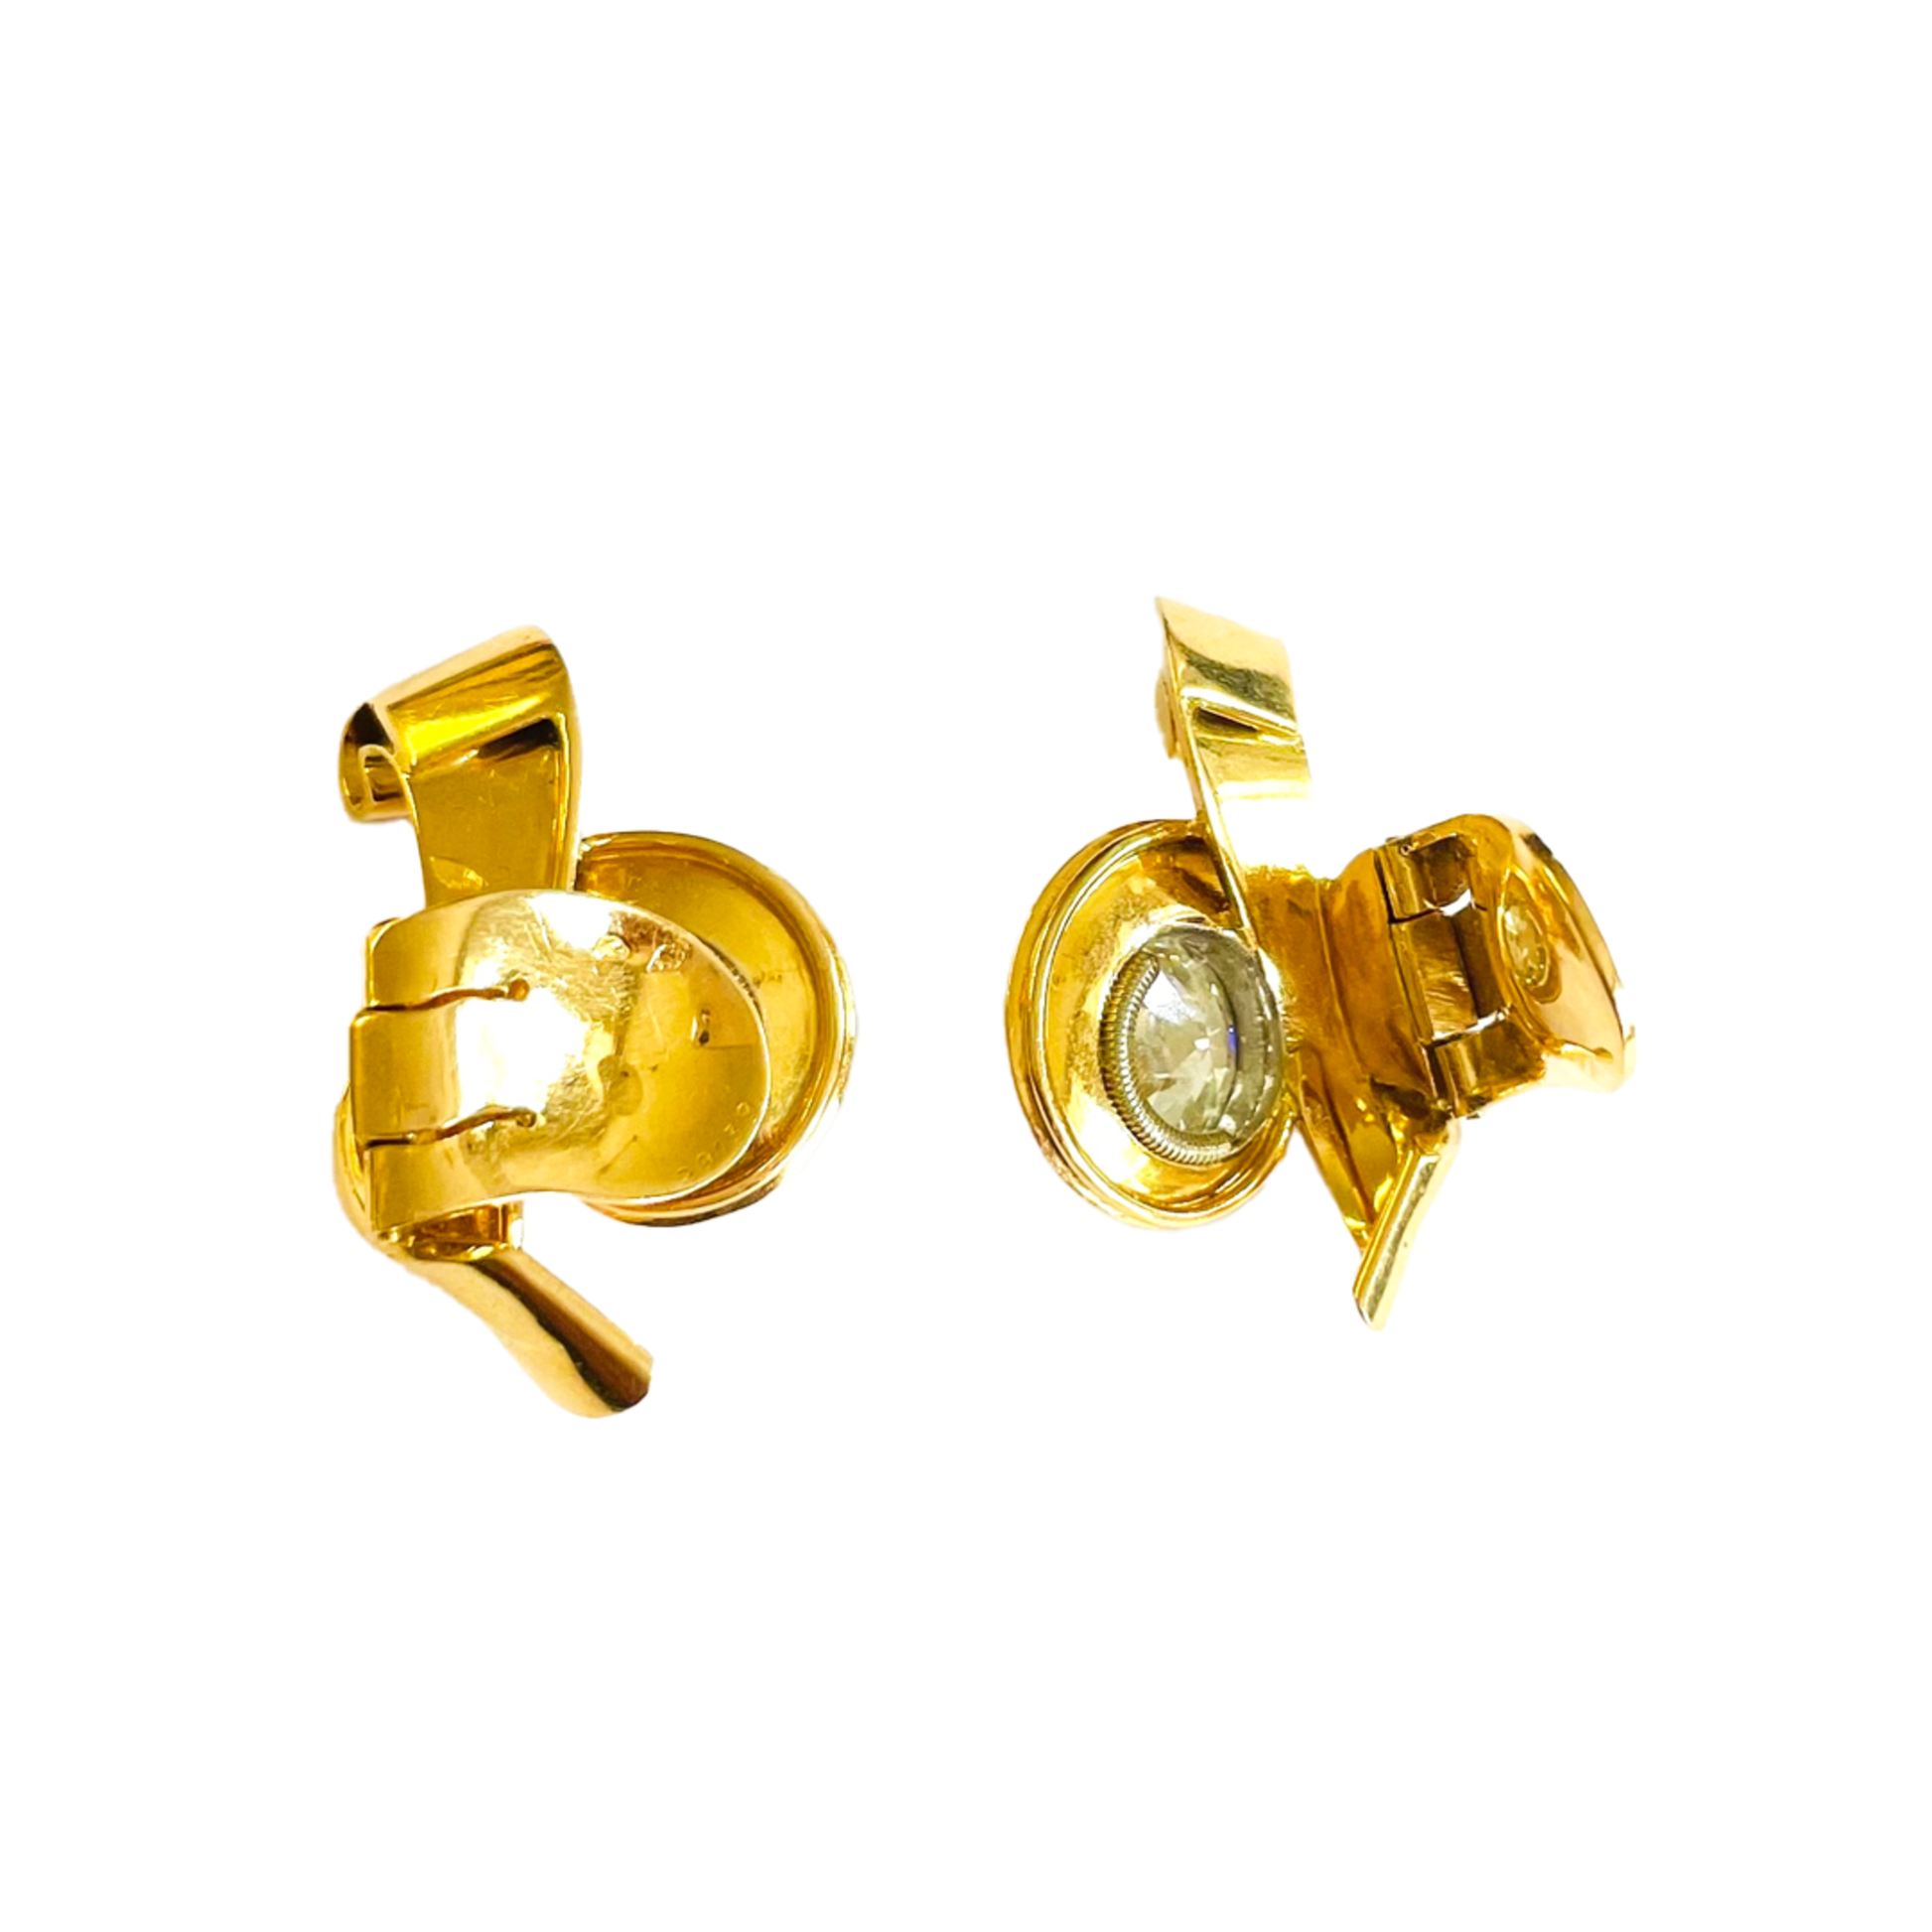 French 1950s Platinum & 18KT Yellow Gold Diamond Earrings back and side